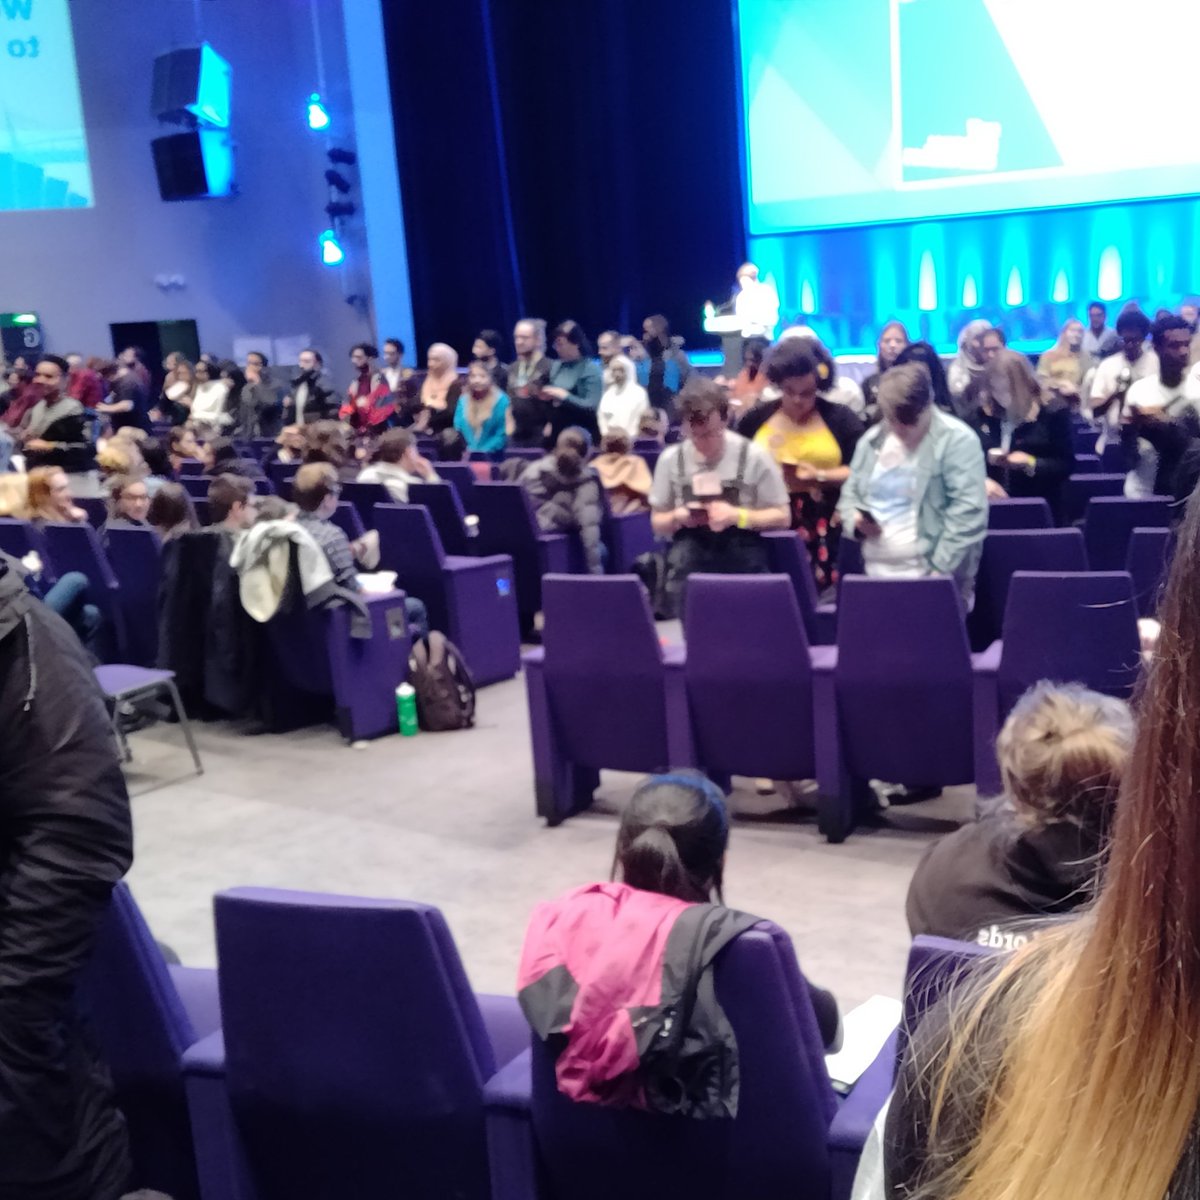 So glad to see so many backs to the stage in solidarity against the comments made in conference. #NUSNC19 #NUSConference